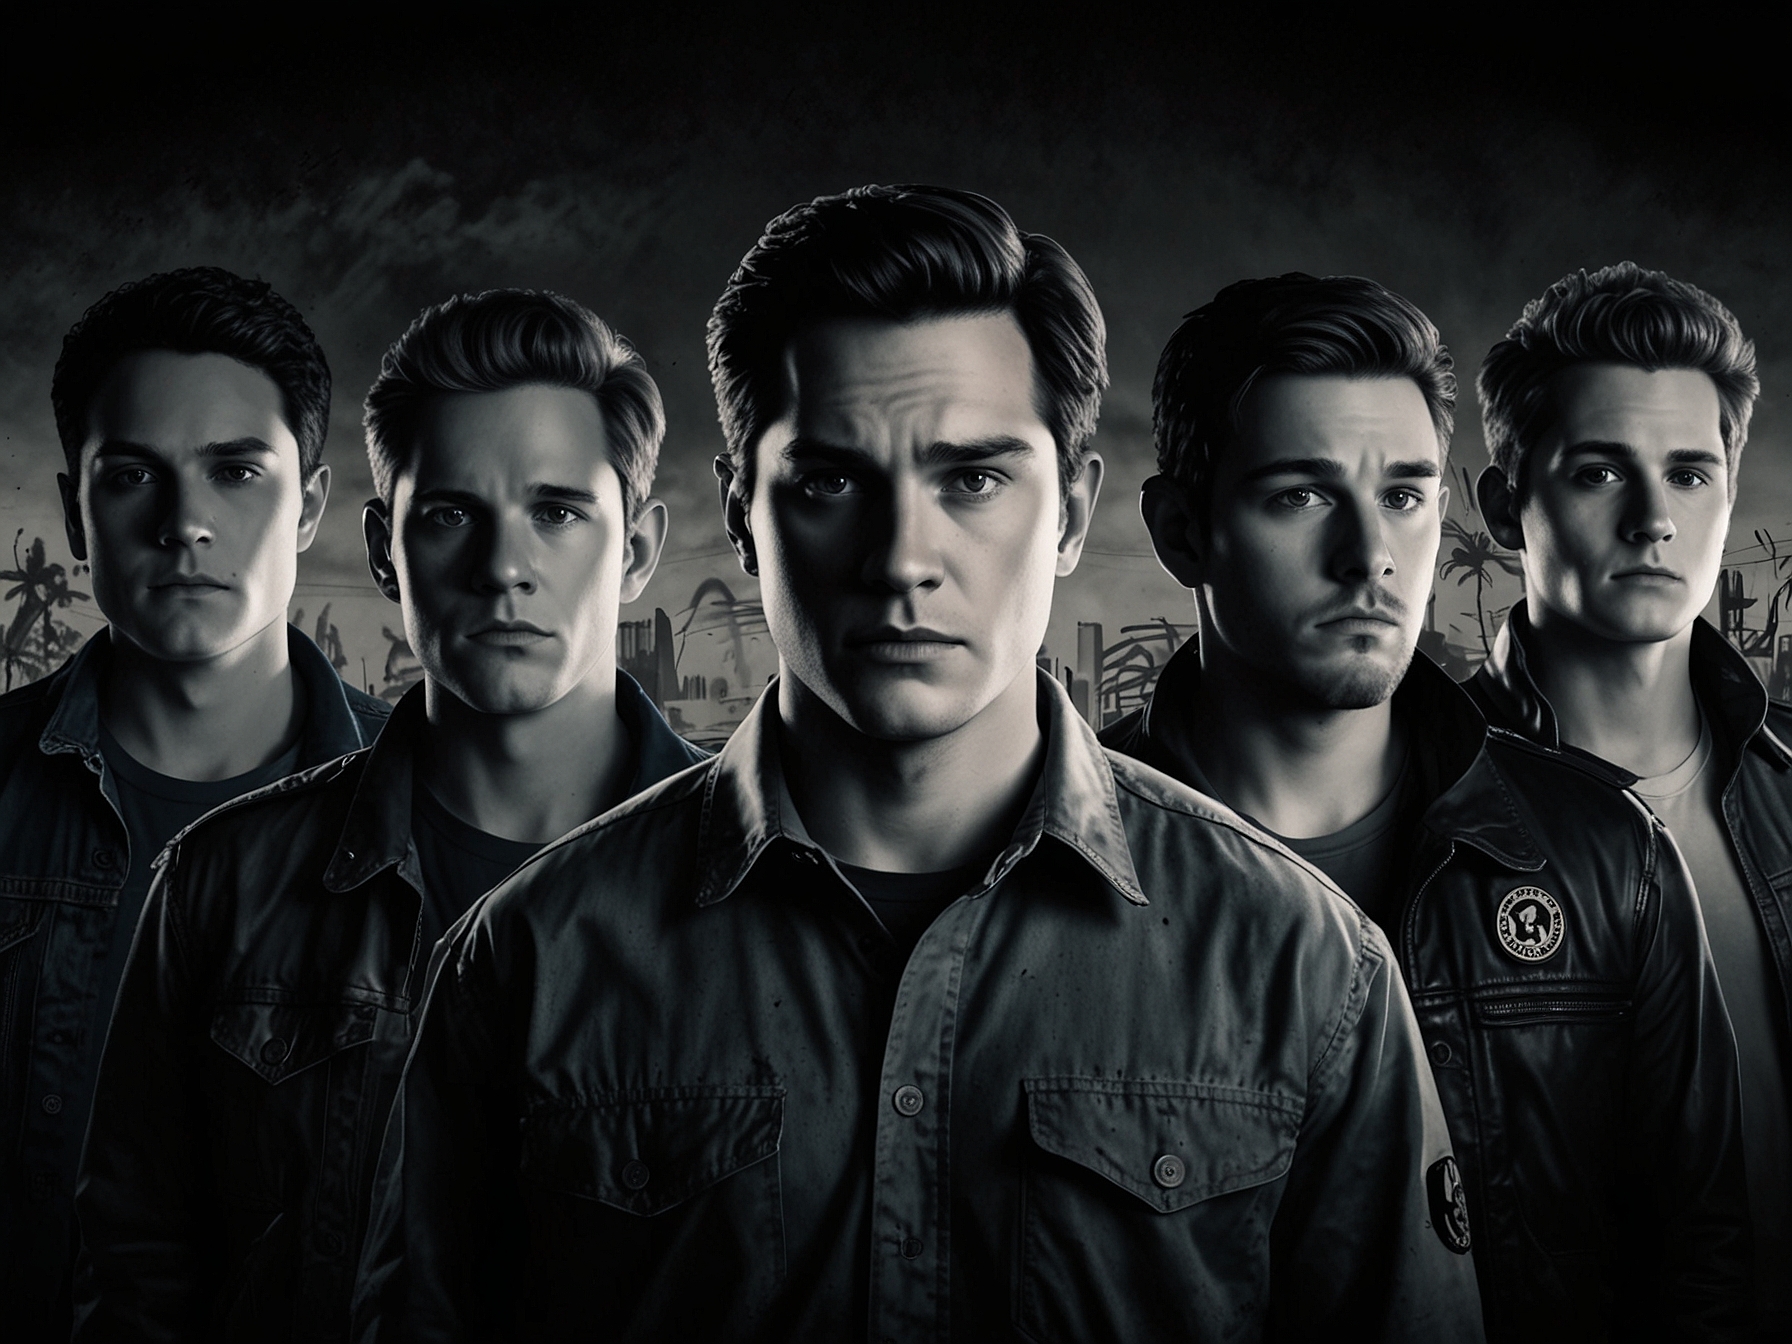 A promotional poster for 'The Boys' Season 4 showcasing the main characters, emphasizing the show's dark and satirical tone. The image highlights the gritty, rebellious aesthetic of the series.